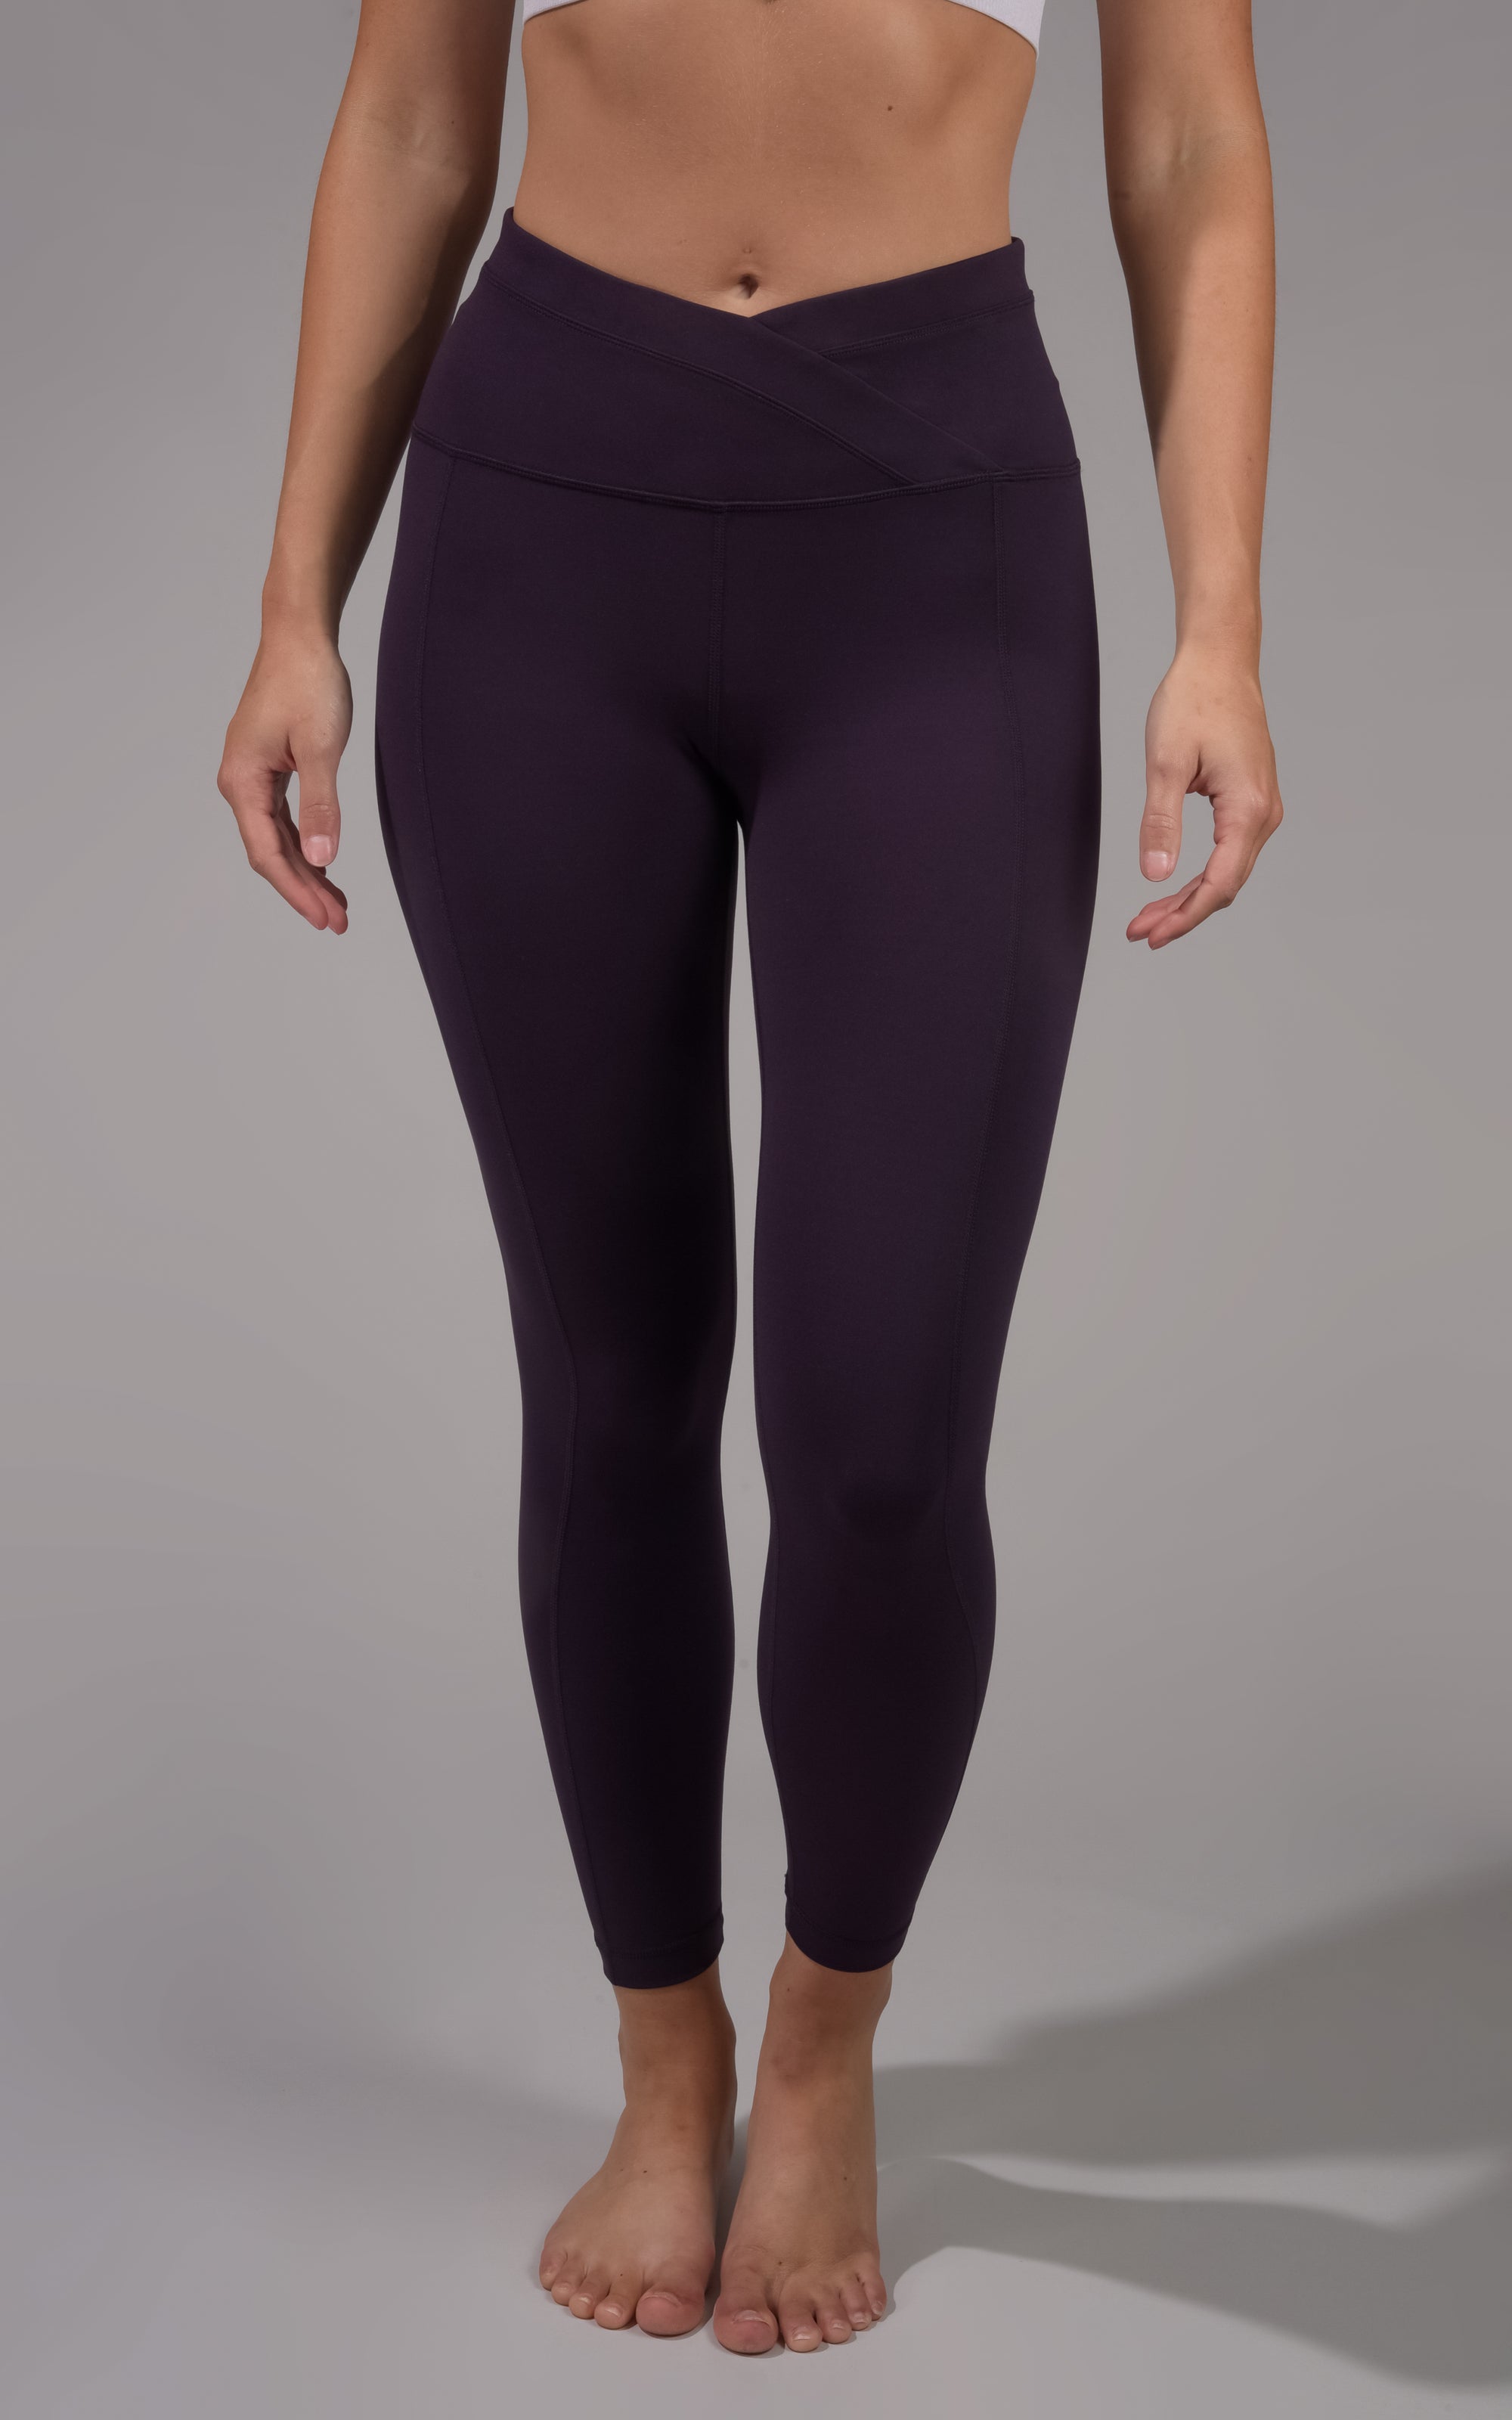 Yogalicious Lux High Waist 7/8 Ankle Legging with Front Criss Cross  Waistband